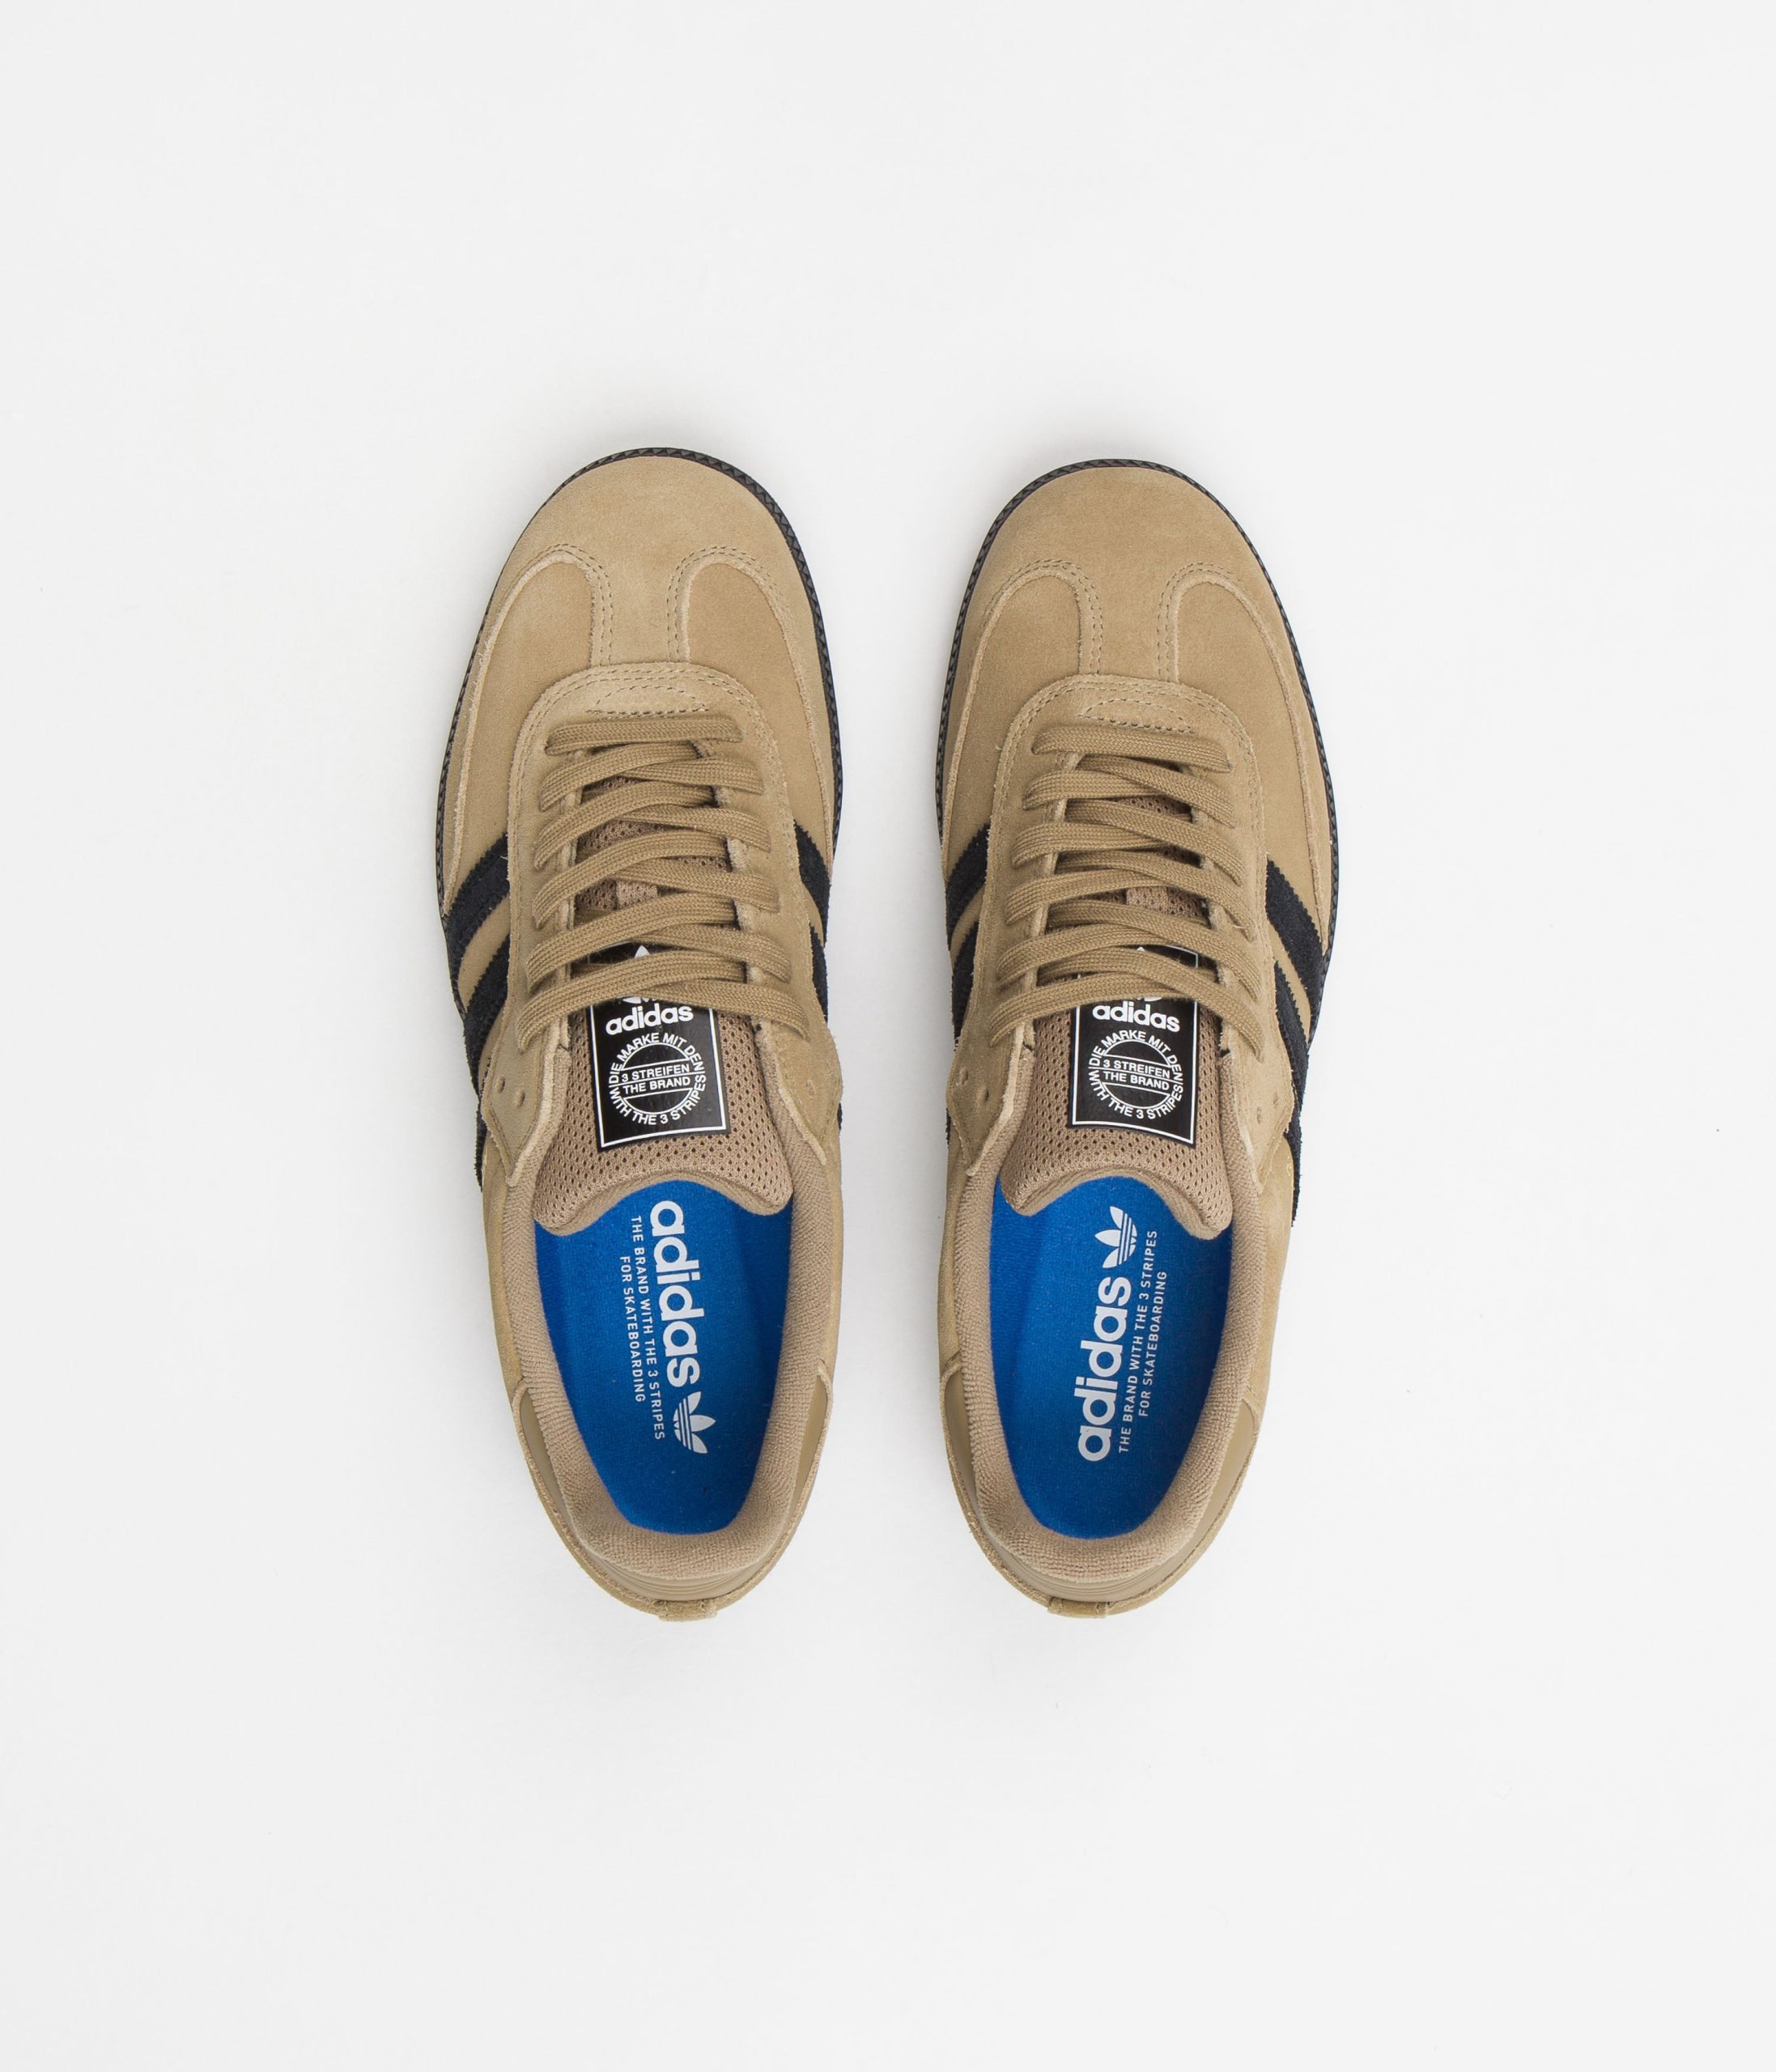 Only 41.60 usd for Adidas Samba ADV Shoes - Cardboard / Core Black /  Bluebird Online at the Shop